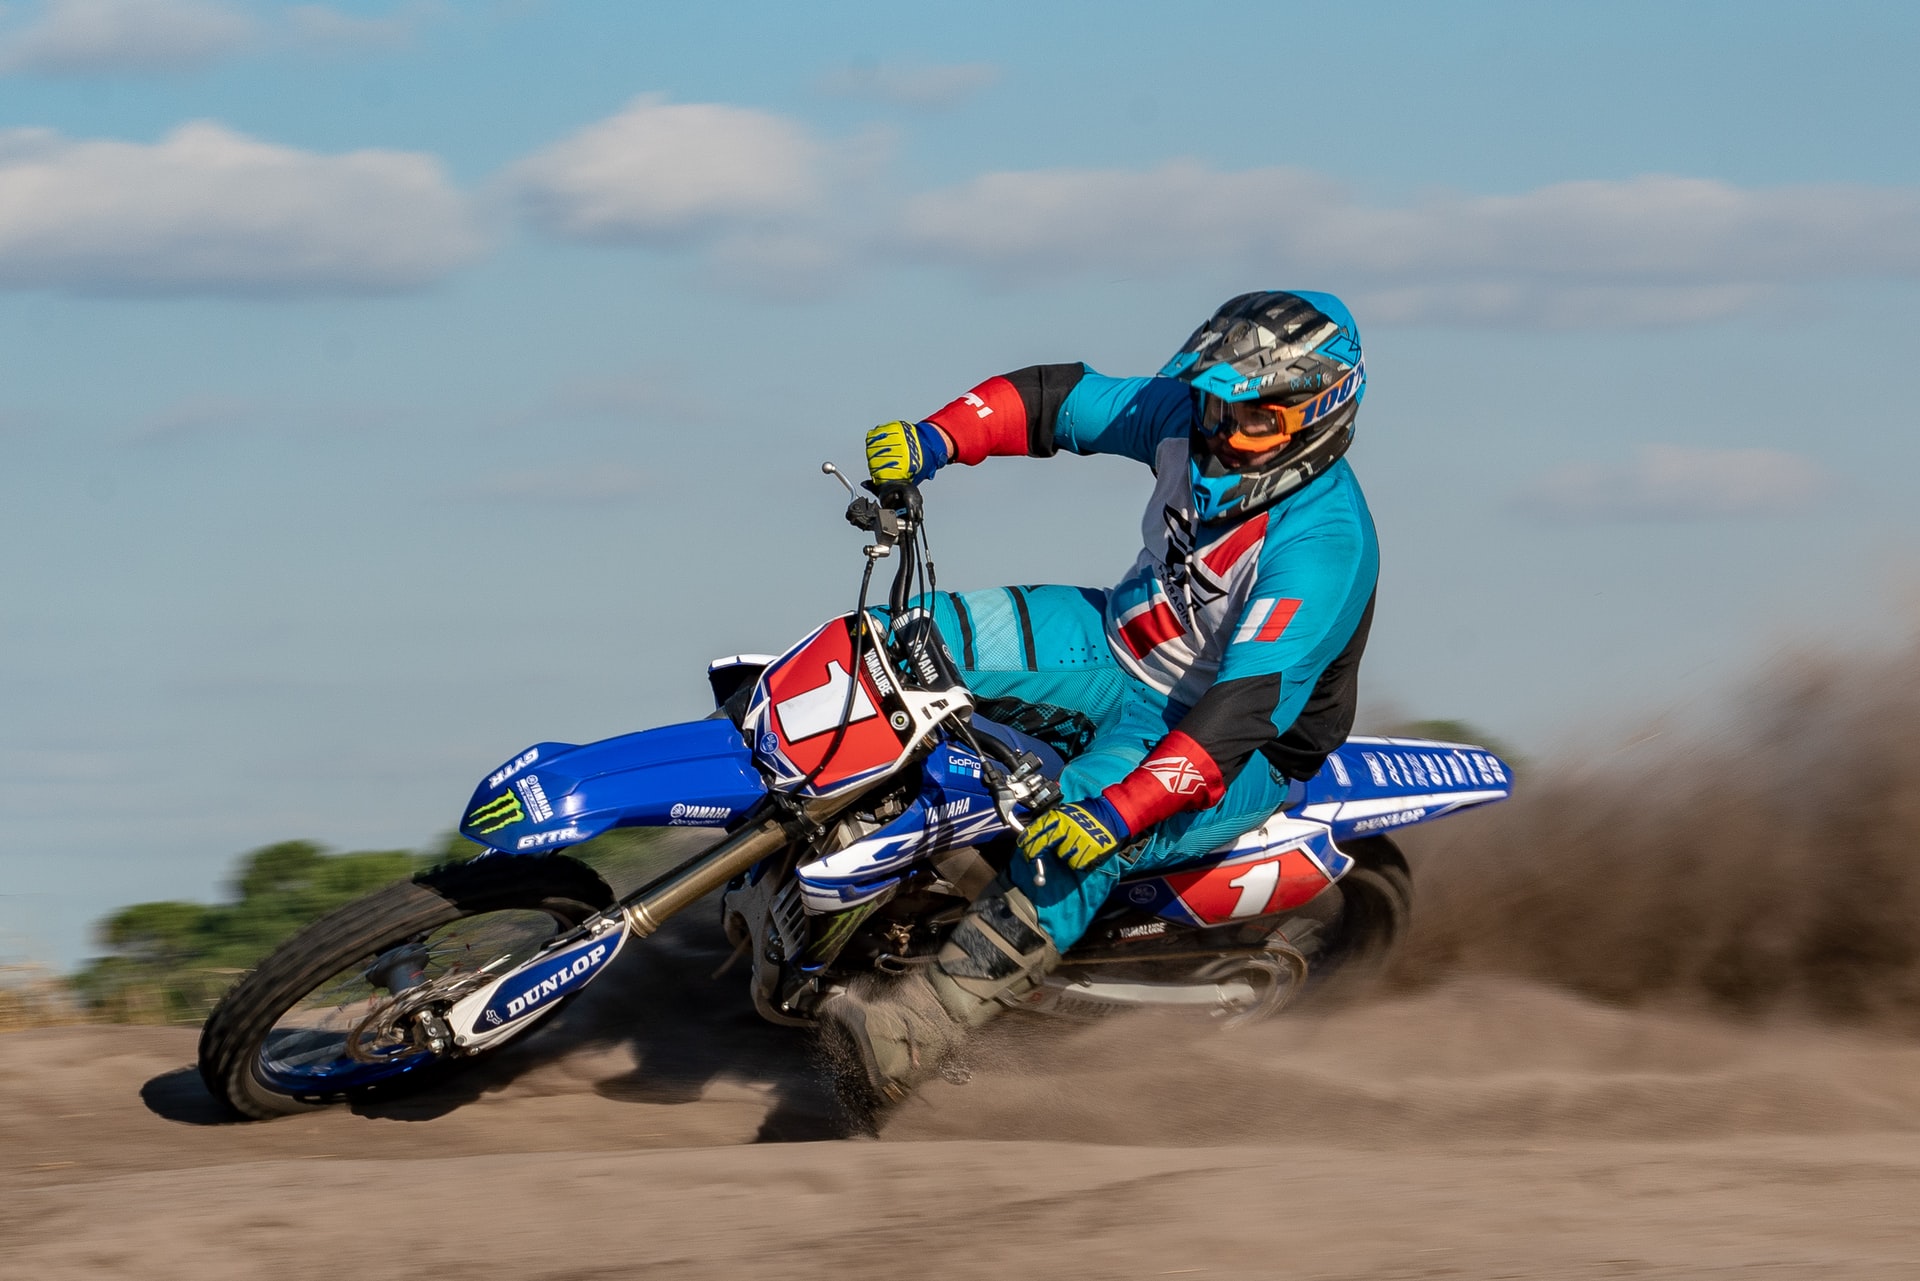 How Fast Does a 90cc Dirt Bike Go?